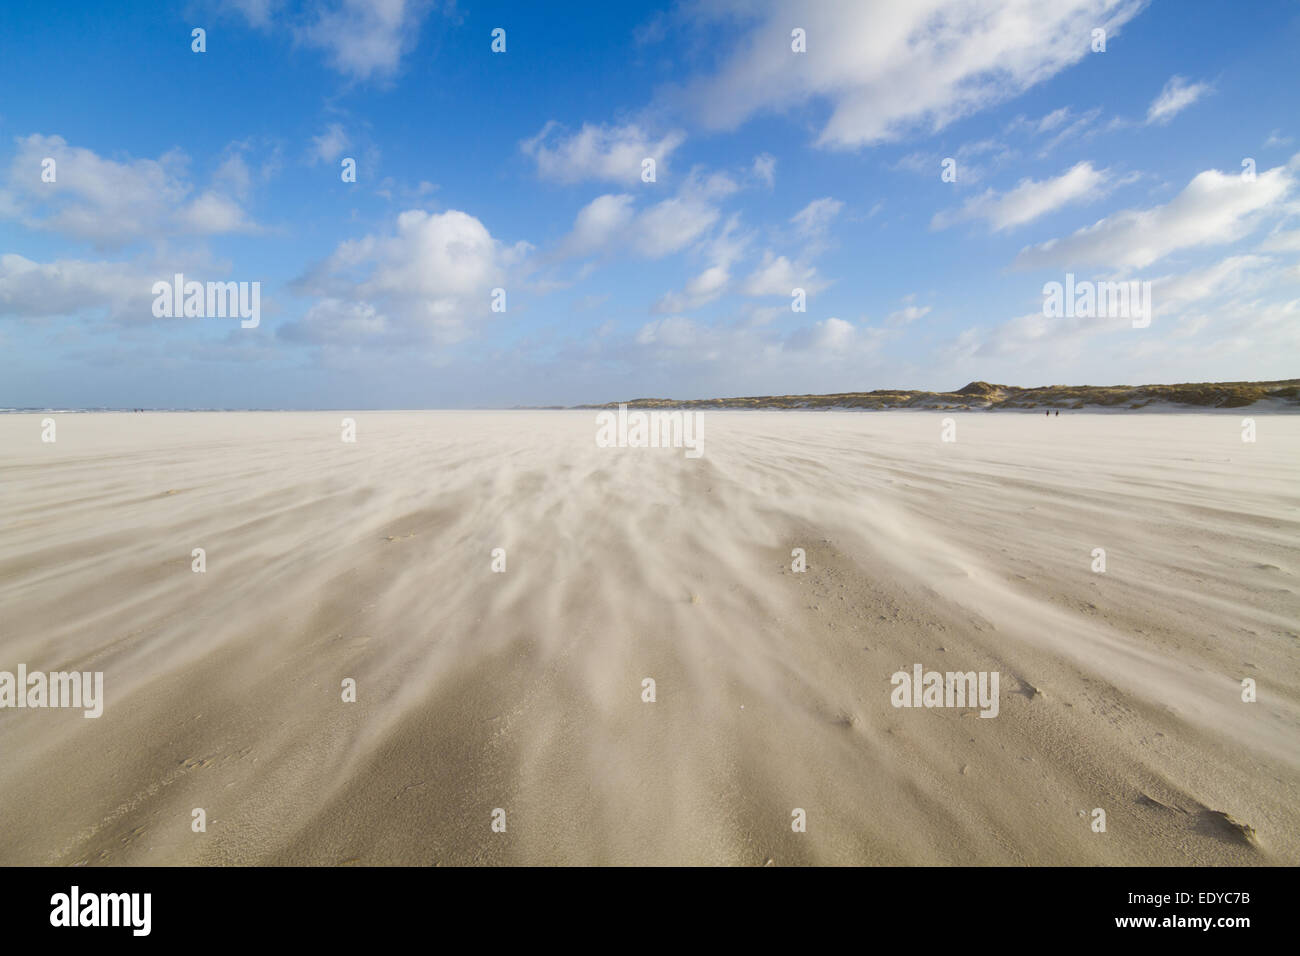 Sand blowing over a vast beach Stock Photo